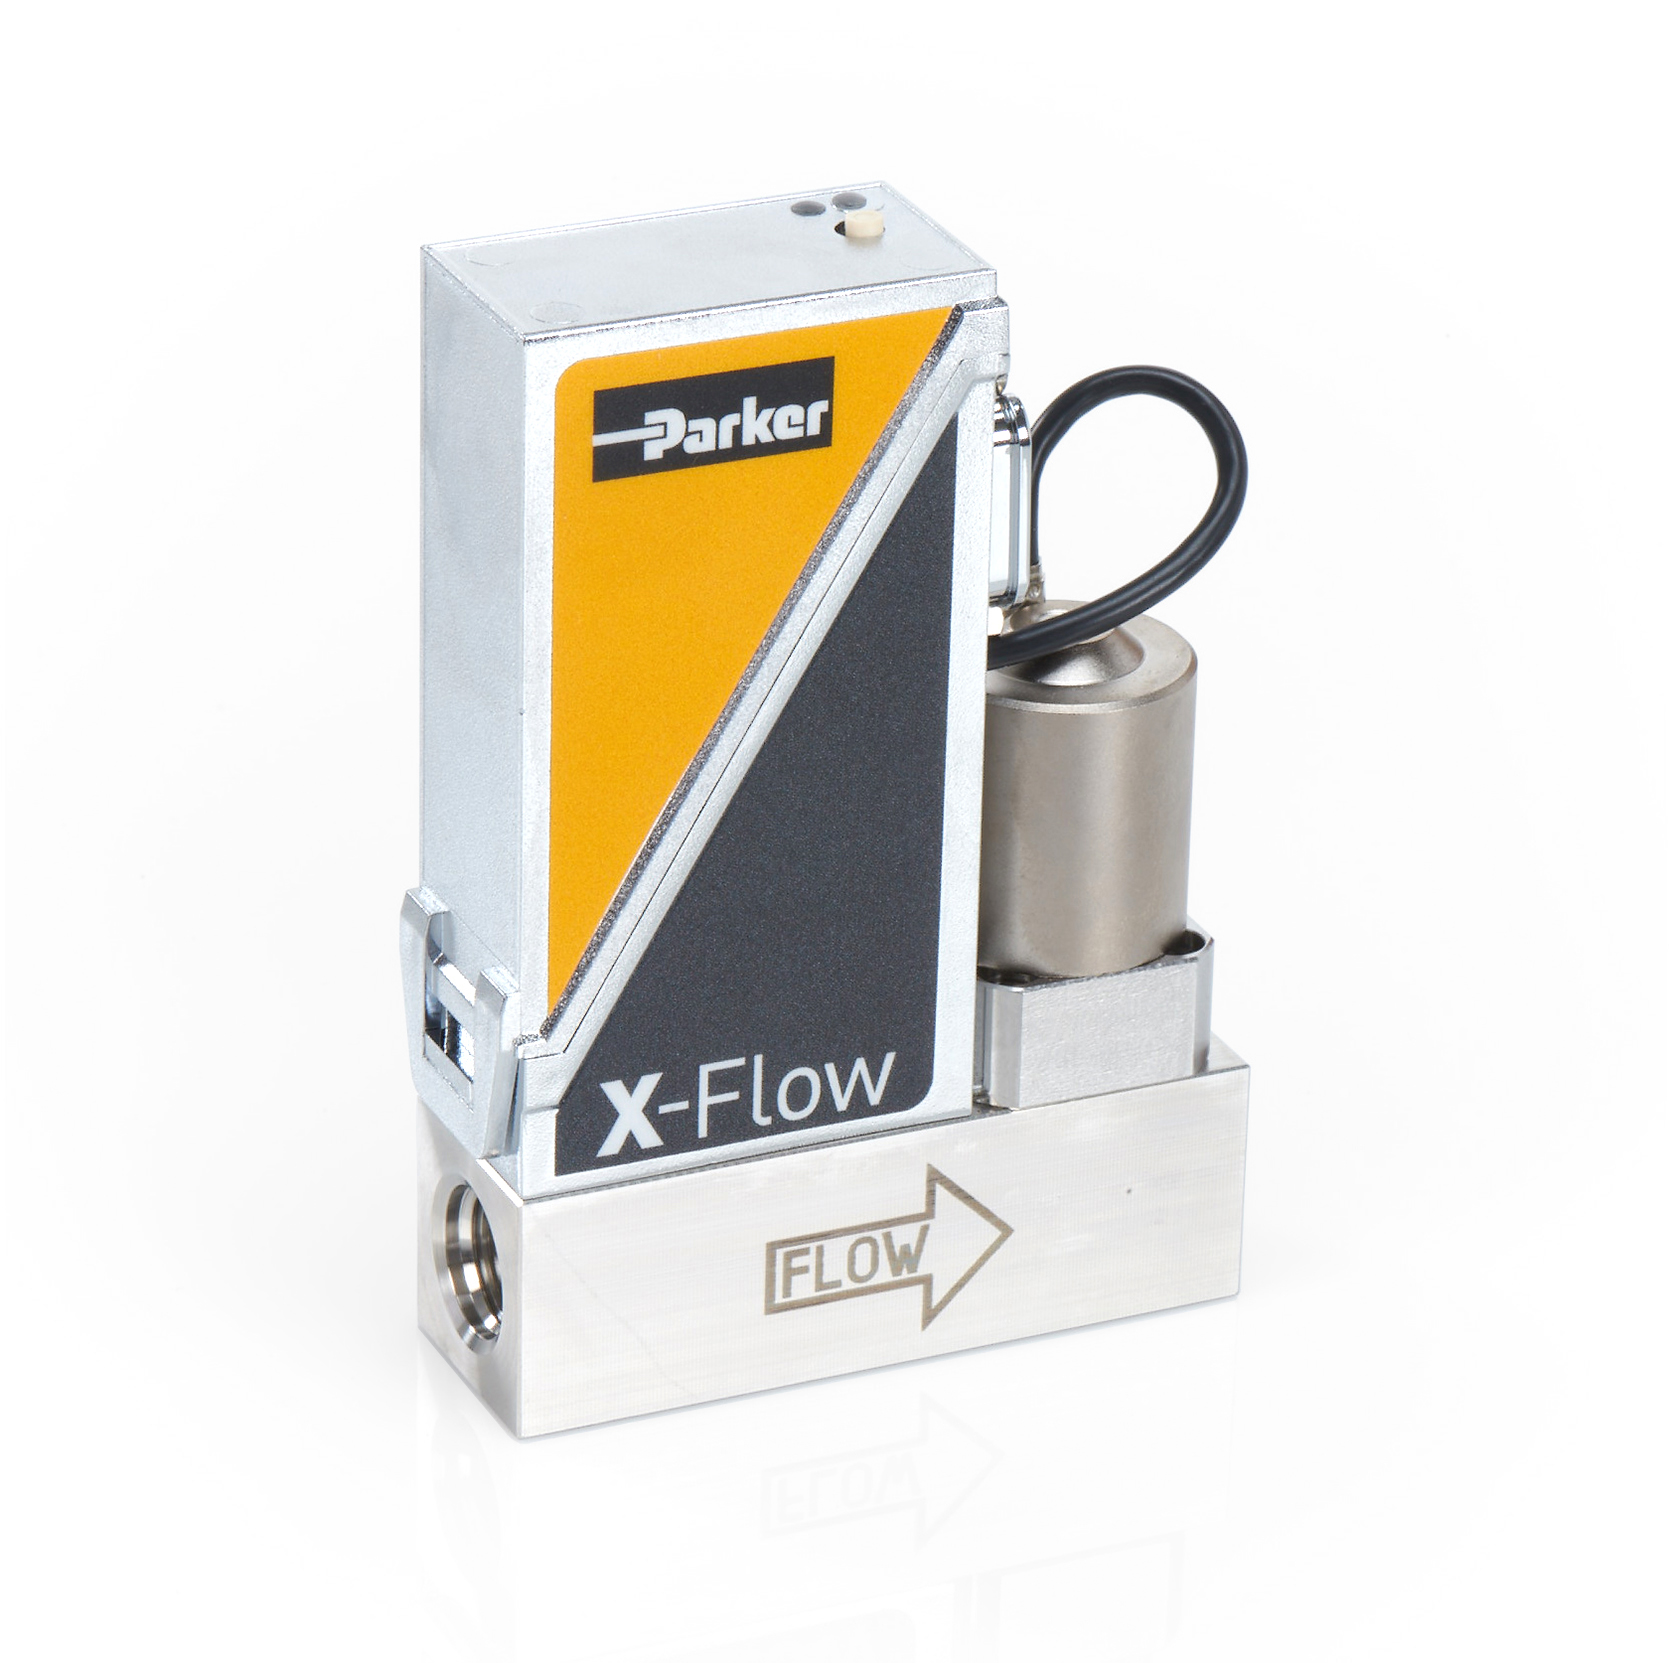 Parker Hannifin's X-Flow Mass Flow Controller provides fast and reliable high accuracy flow control.